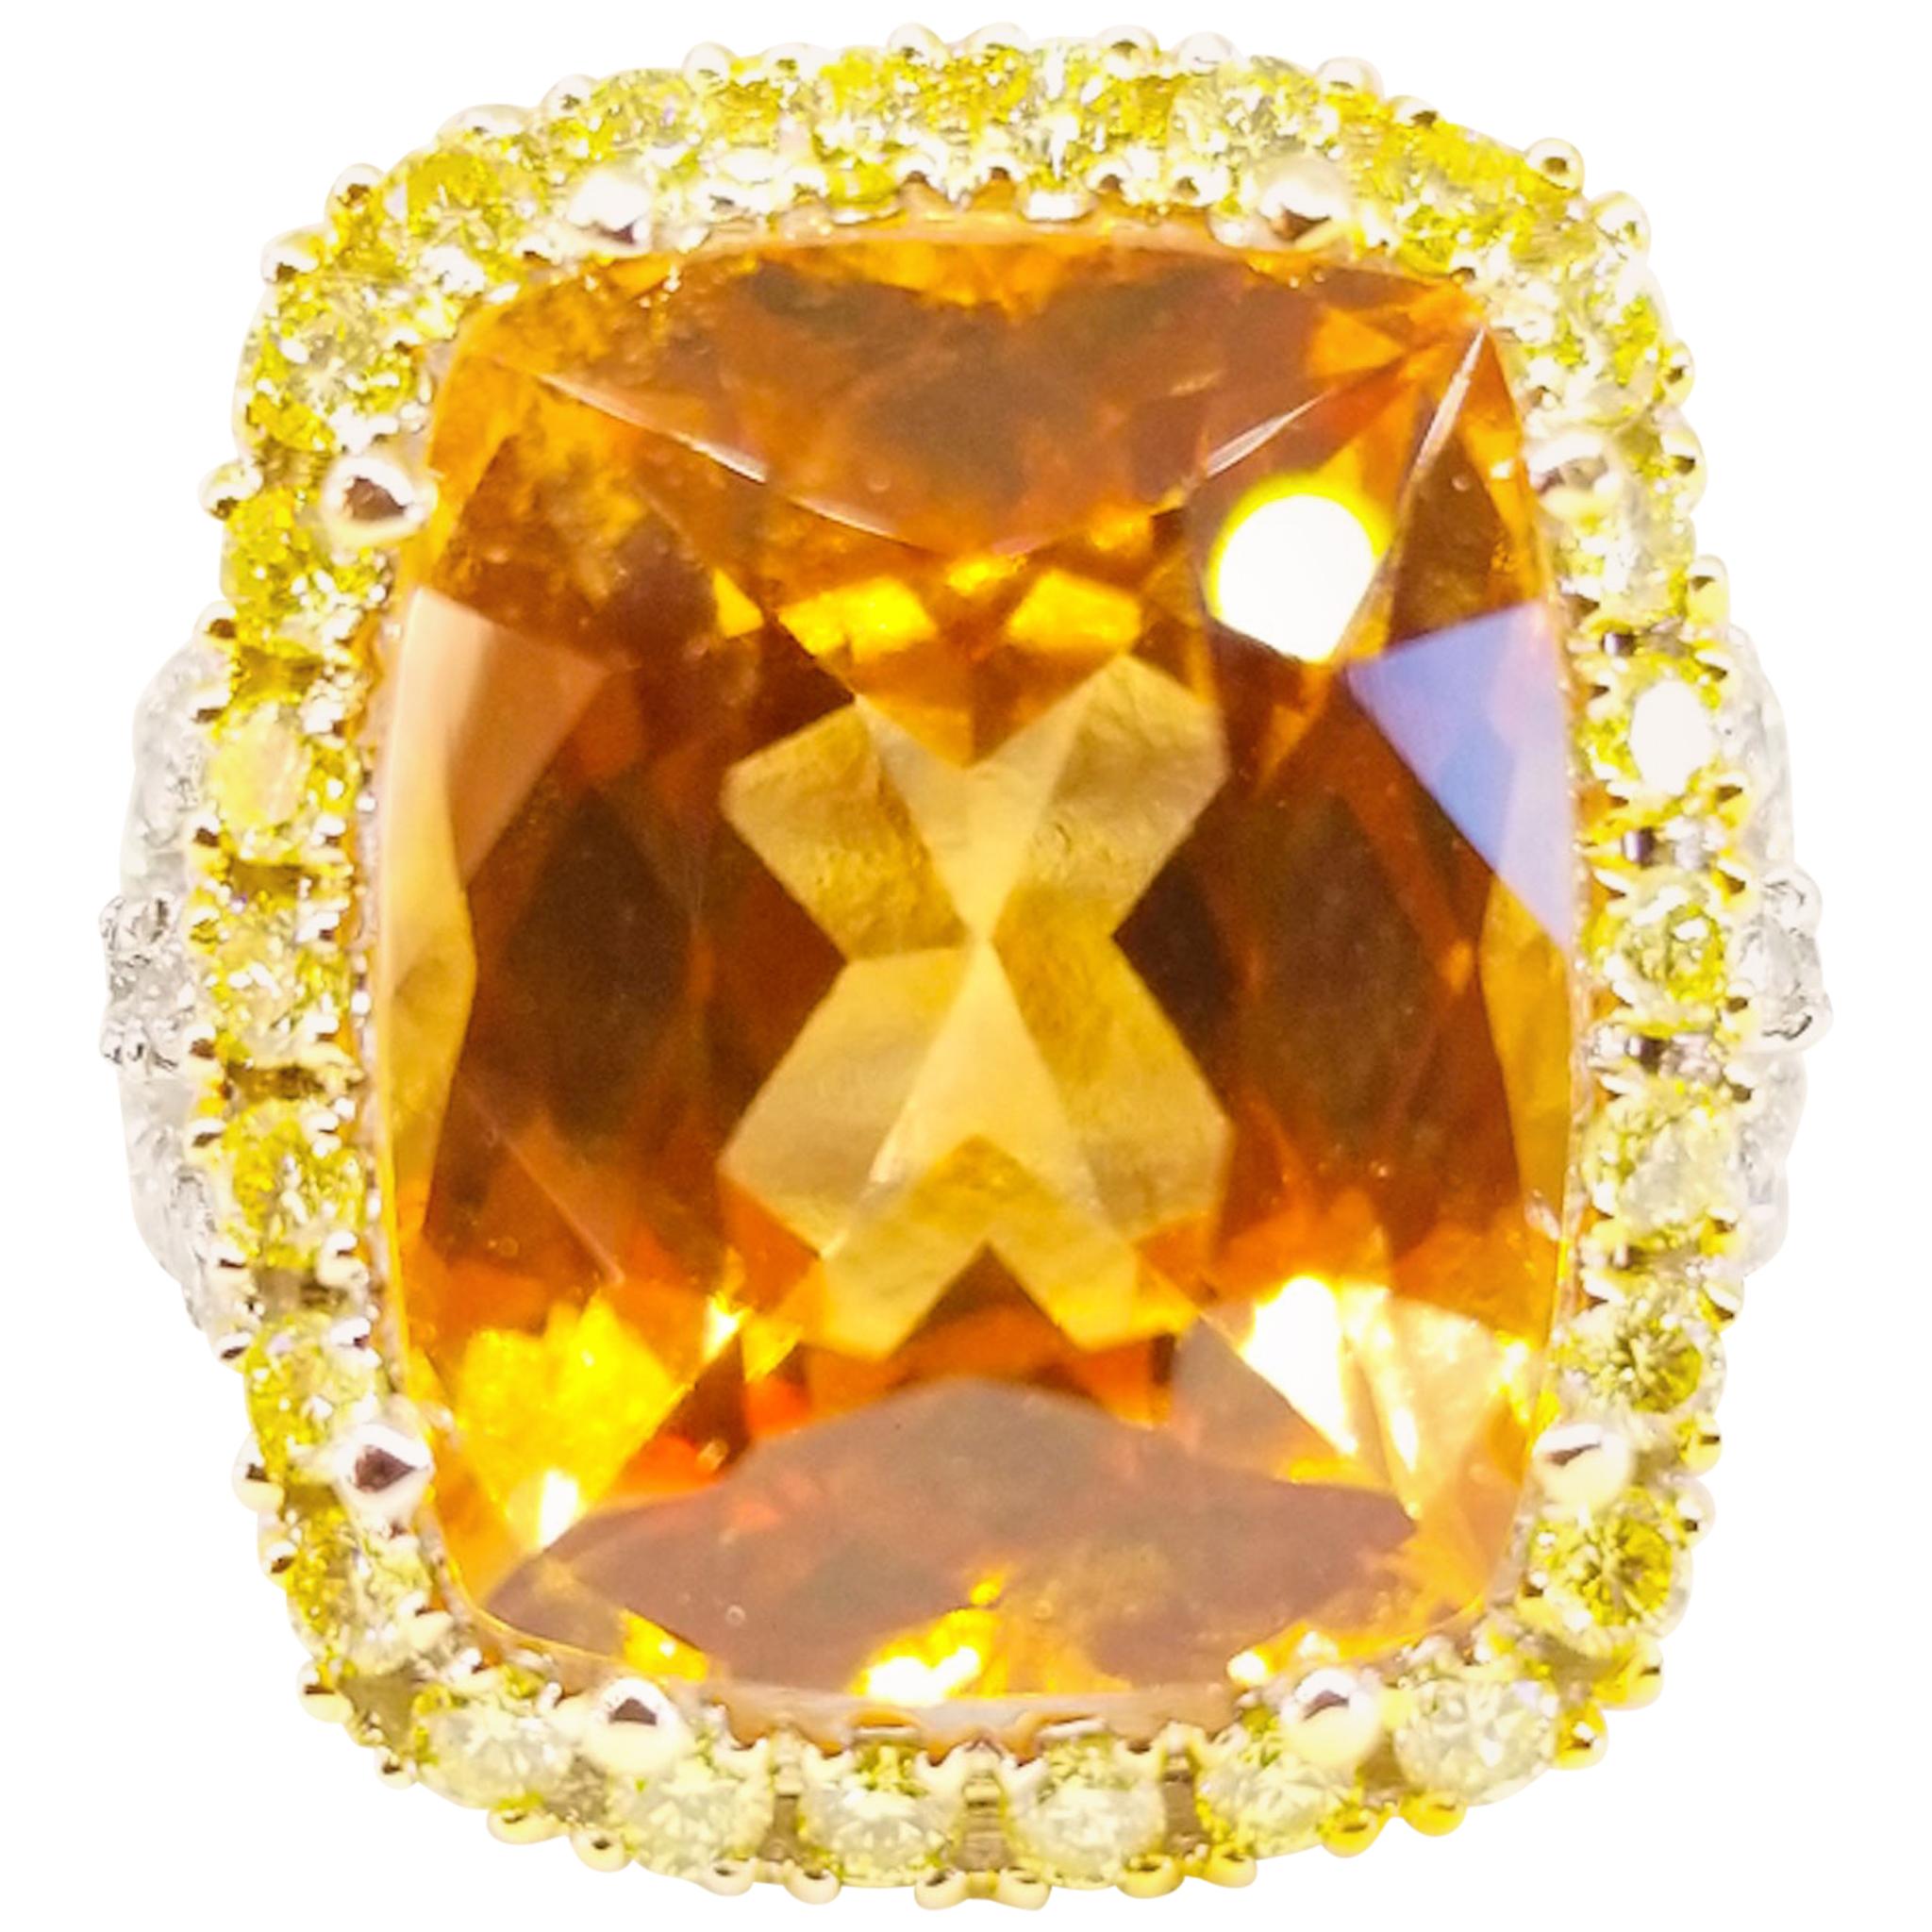 A 13.45 Carat Natural Golden Grossular Garnet of XXX Gem Quality, Intense Color and Exceptional Cutting is the centerpiece of this ring one of a kind Ring by Artisan Tom Castor. The large Cushion cut Garnet center stone is double prong set and is